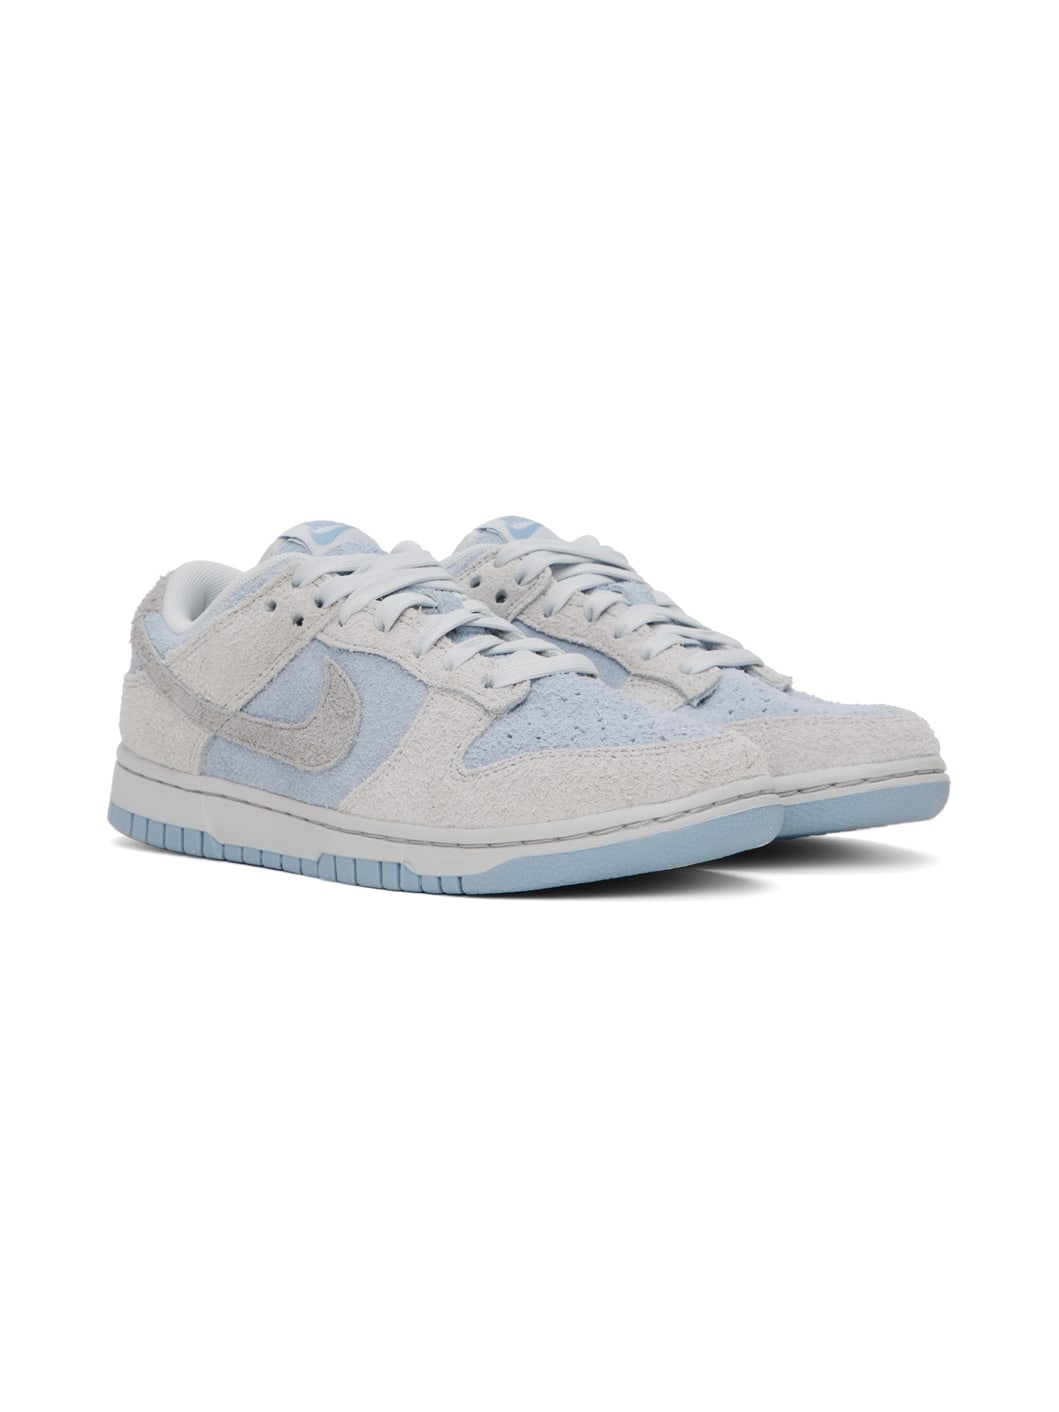 Blue & Gray Dunk Low Sneakers - 4